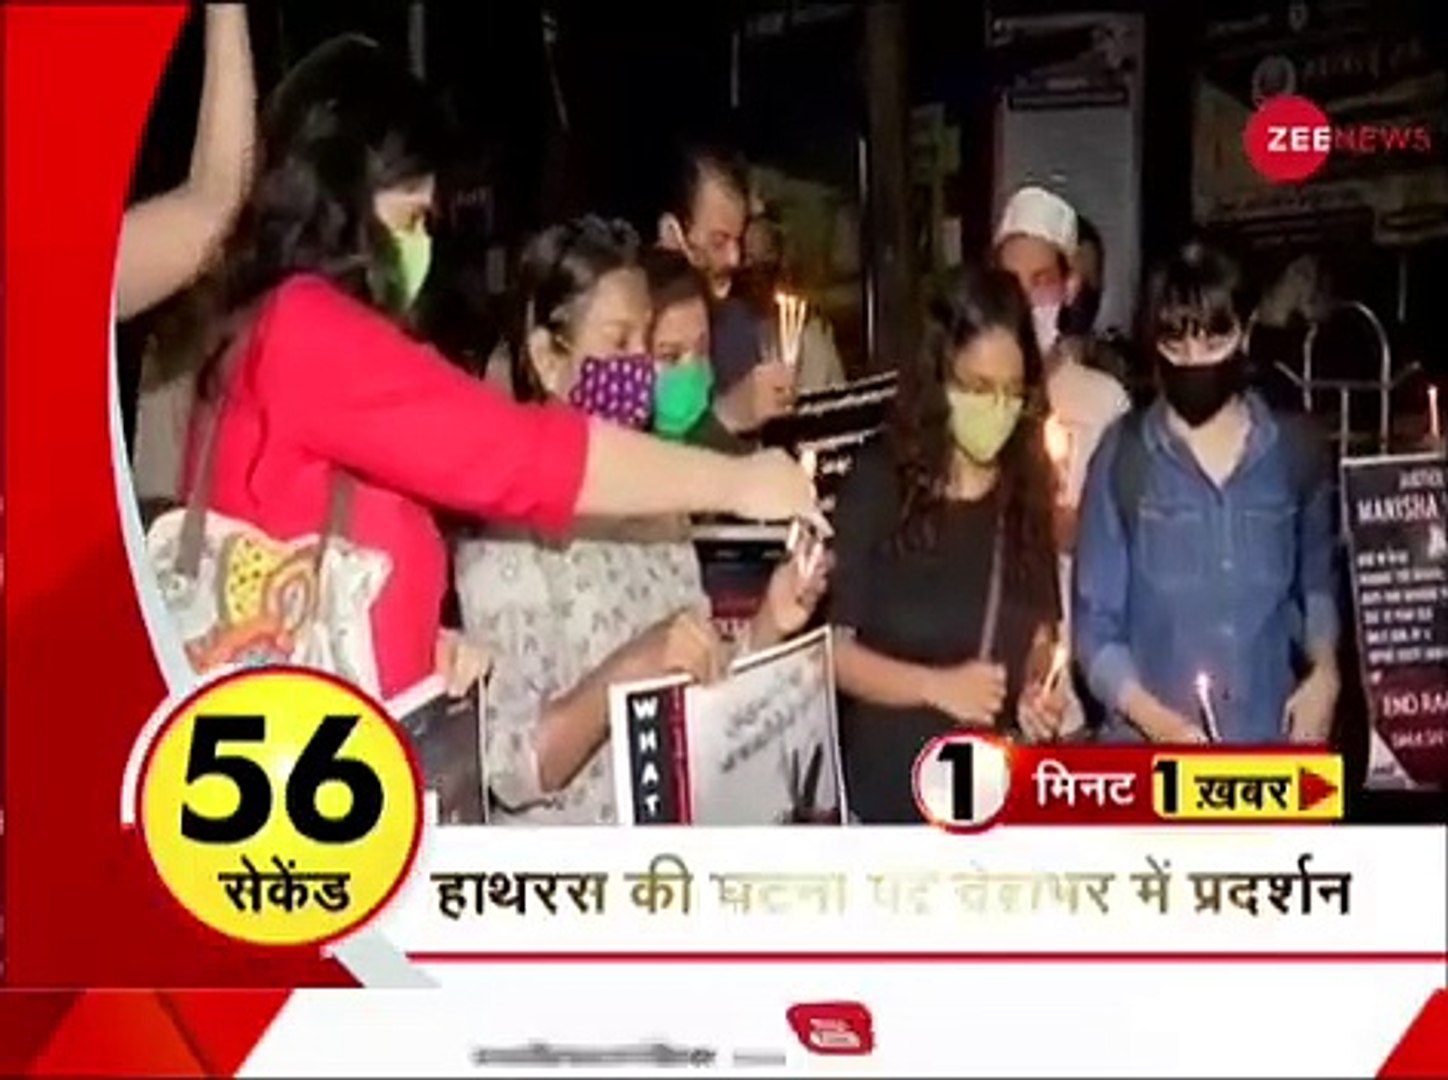 News in hindi || Today latest news in hindi || 1 minute 1 khabar || Morning latest news